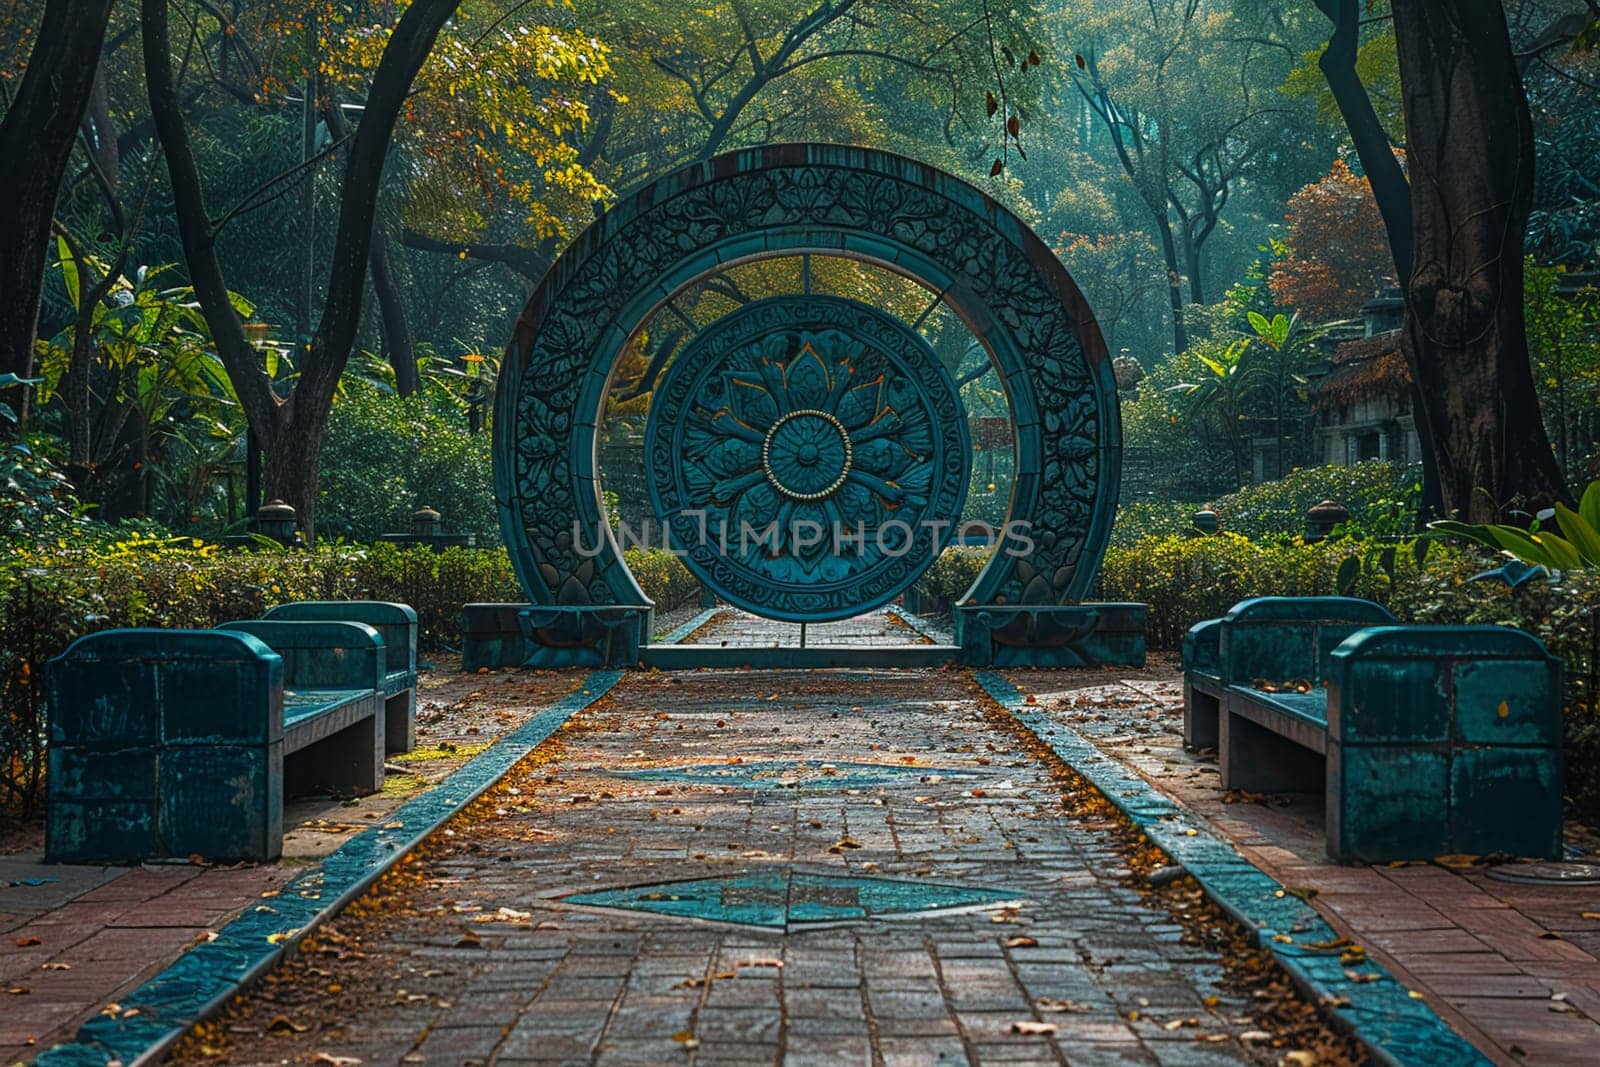 Dharma Wheel Symbolizing the Buddha's Teachings, The wheel's outline blends into the setting, representing the path to enlightenment.